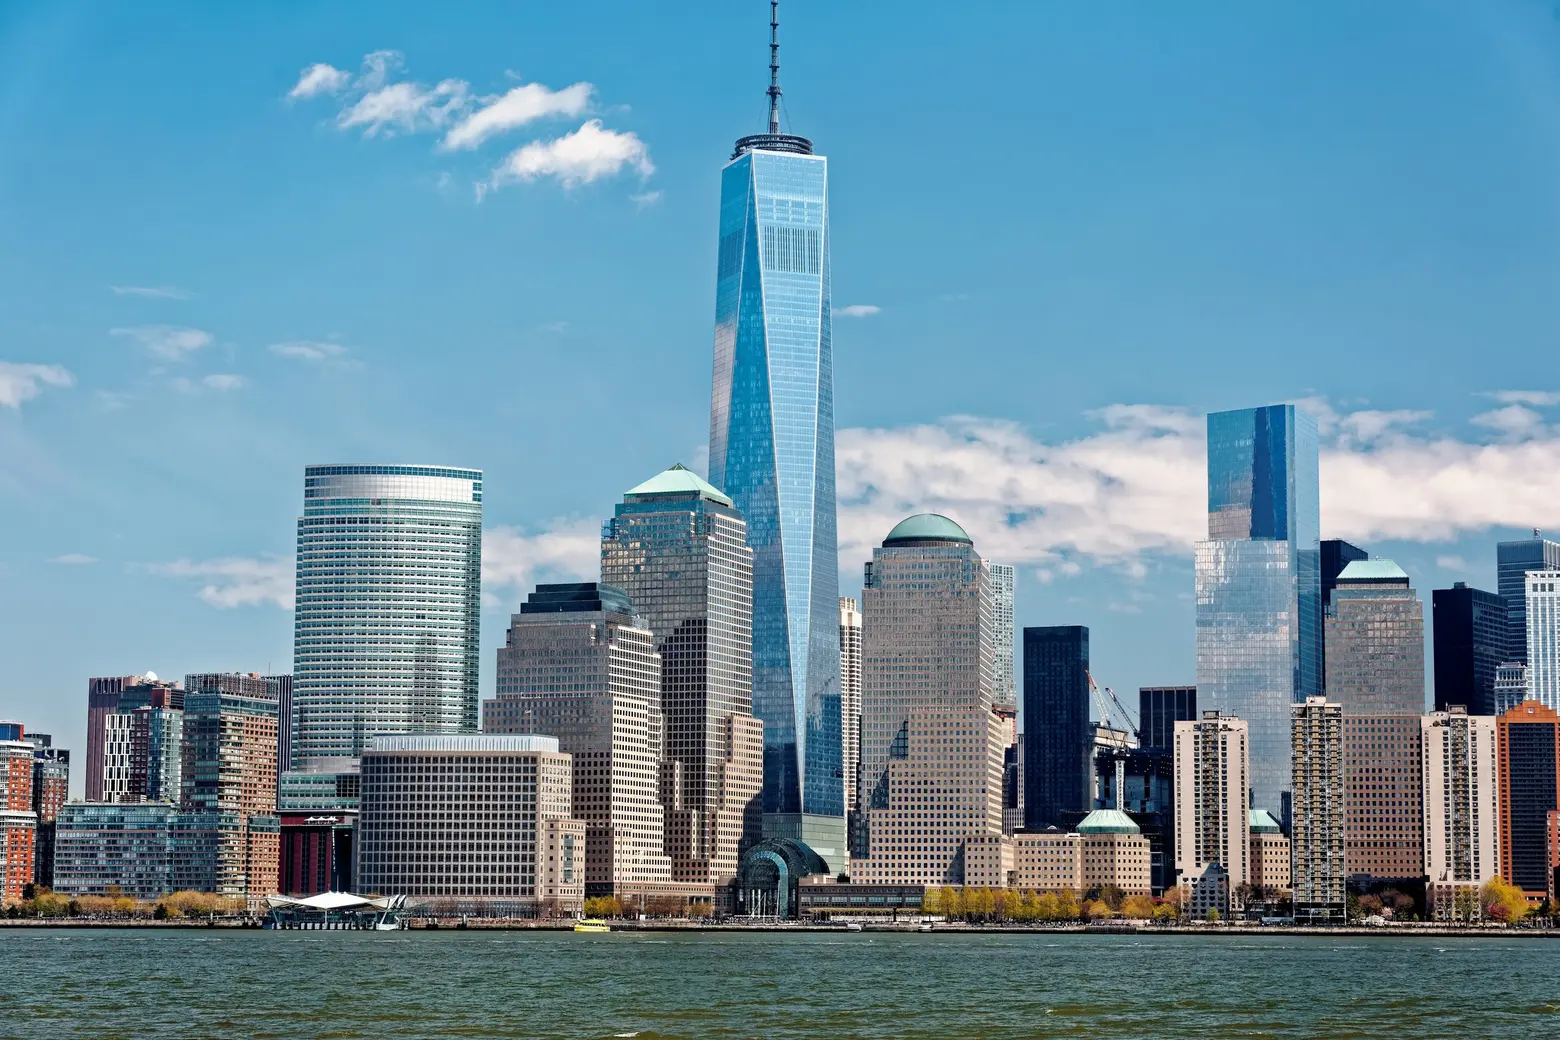 One world trade center, skyscrapers, tall towers, supertalls